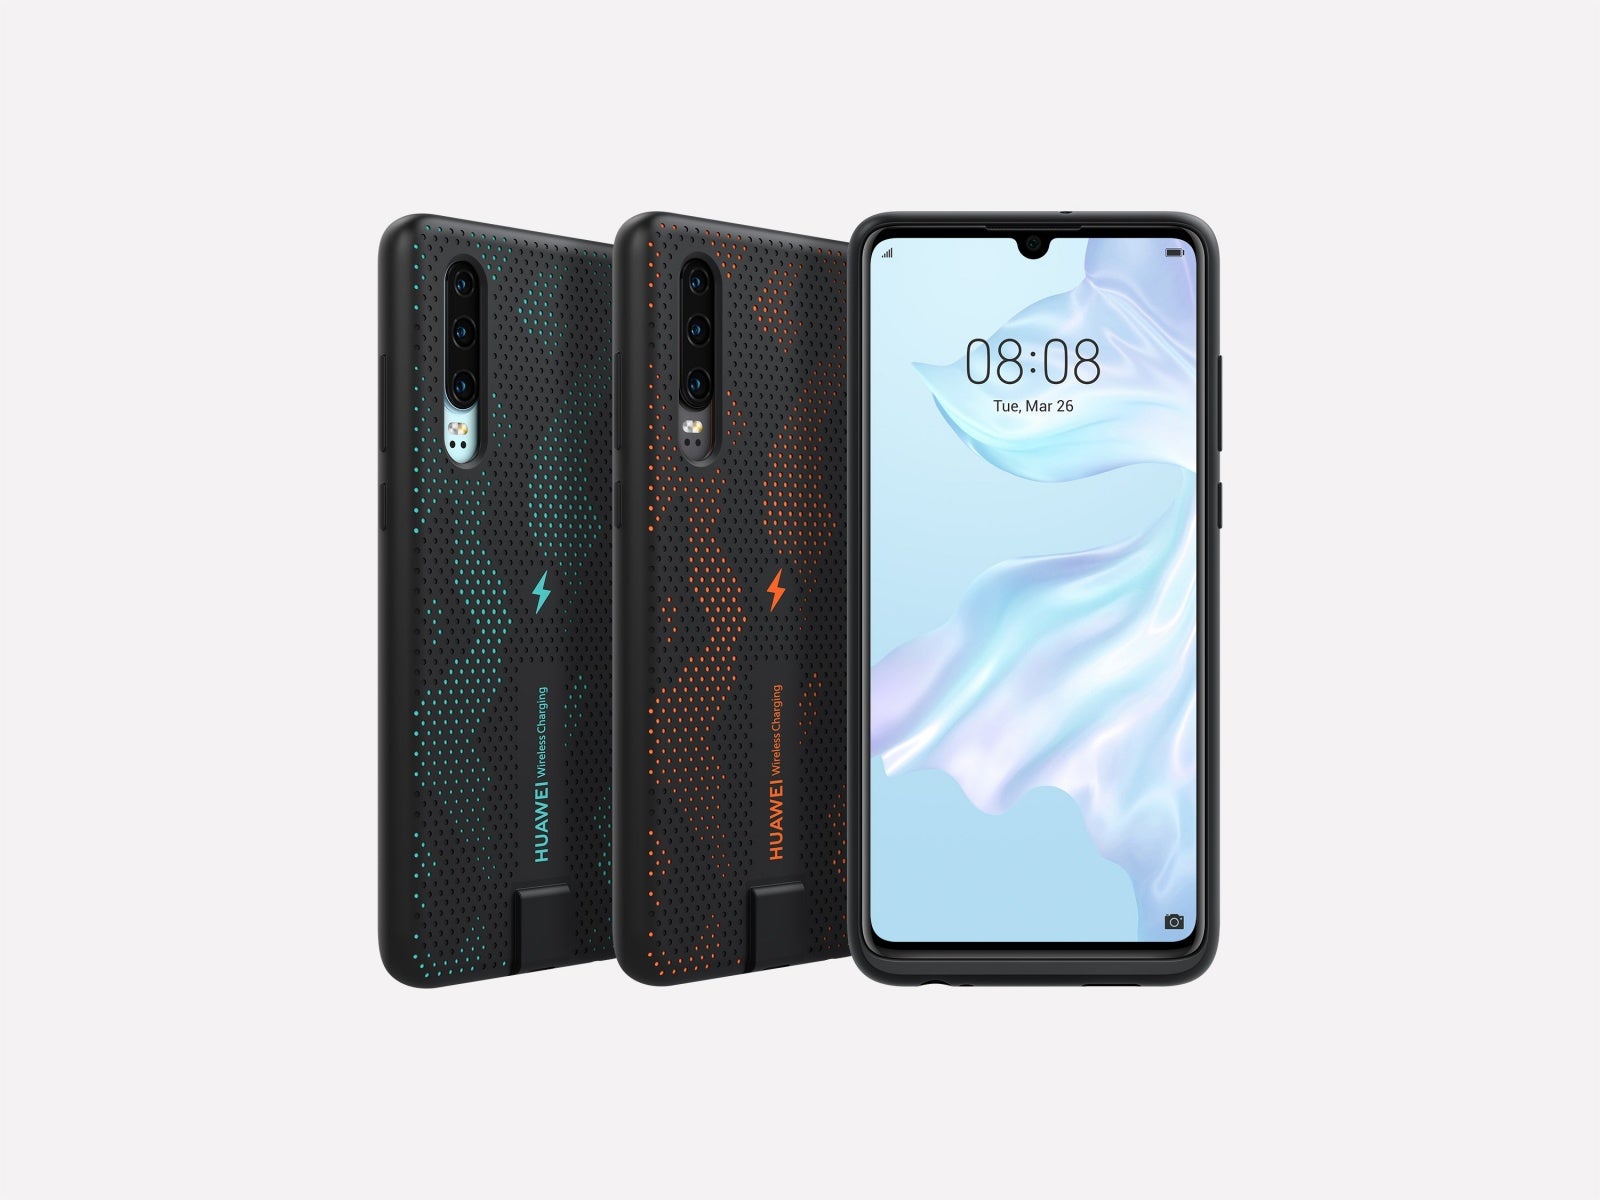 [Test] Huawei Just Unveiled a Phone Case That Enables the Wireless Charging Function On the P30! - WORLD OF BUZZ 5